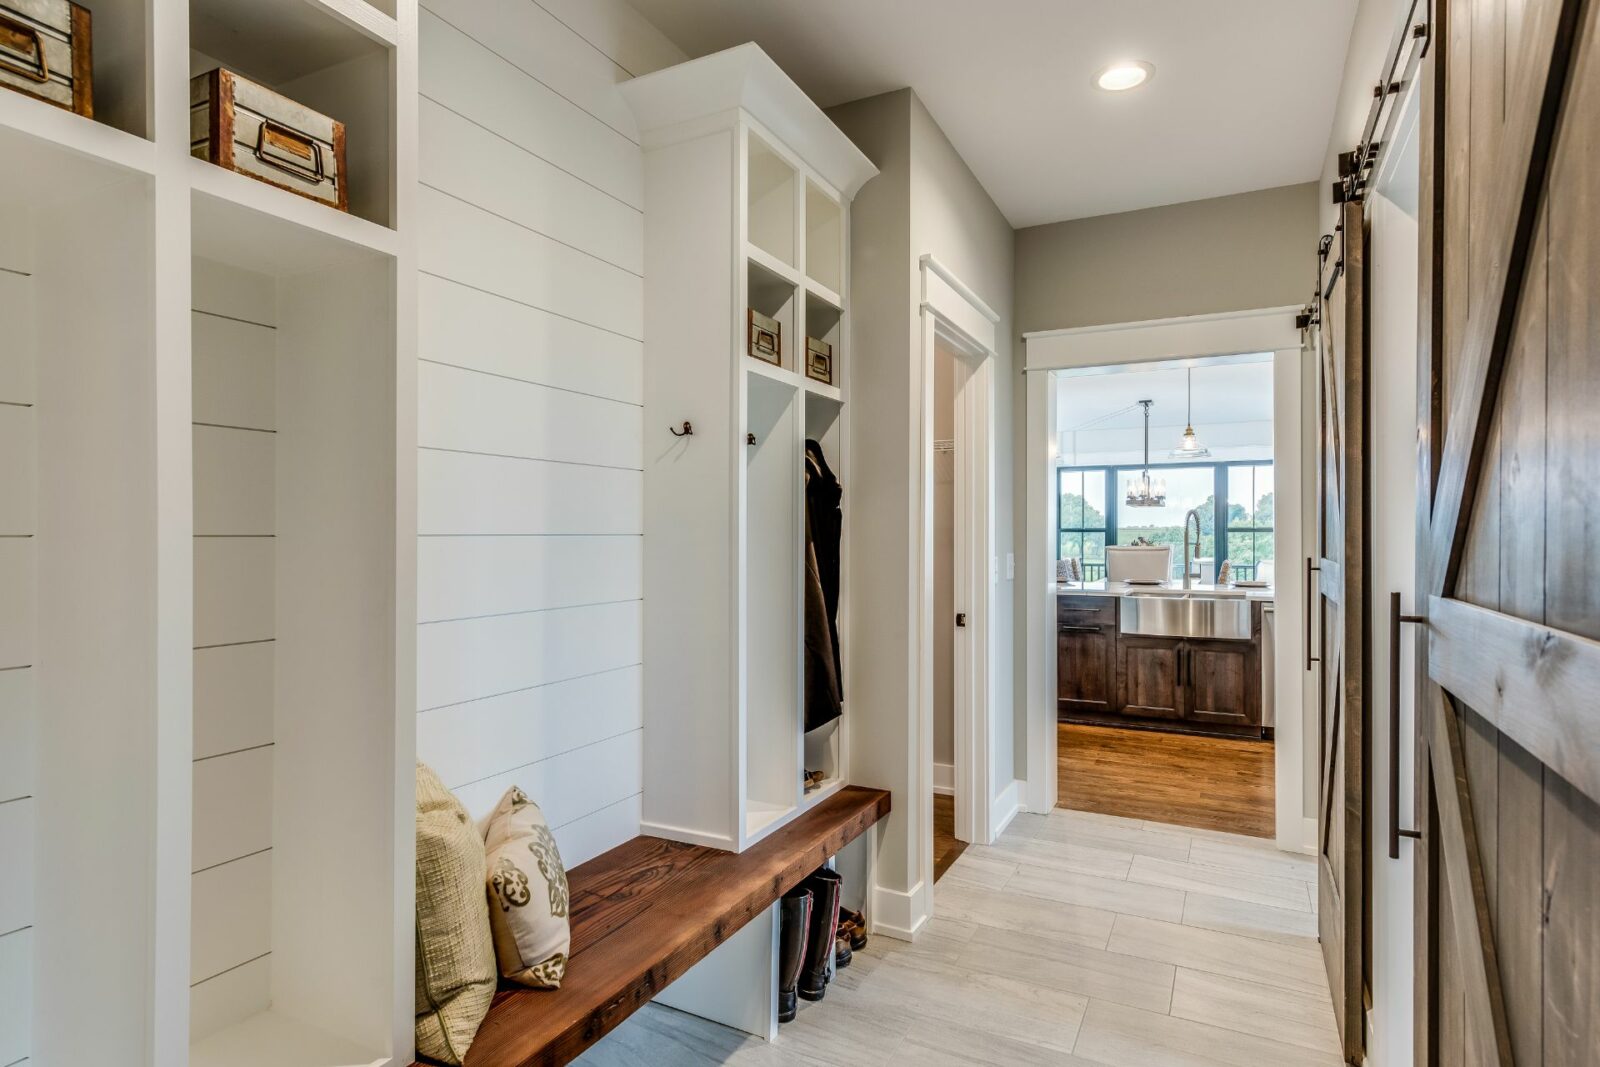 House plans with mudroom